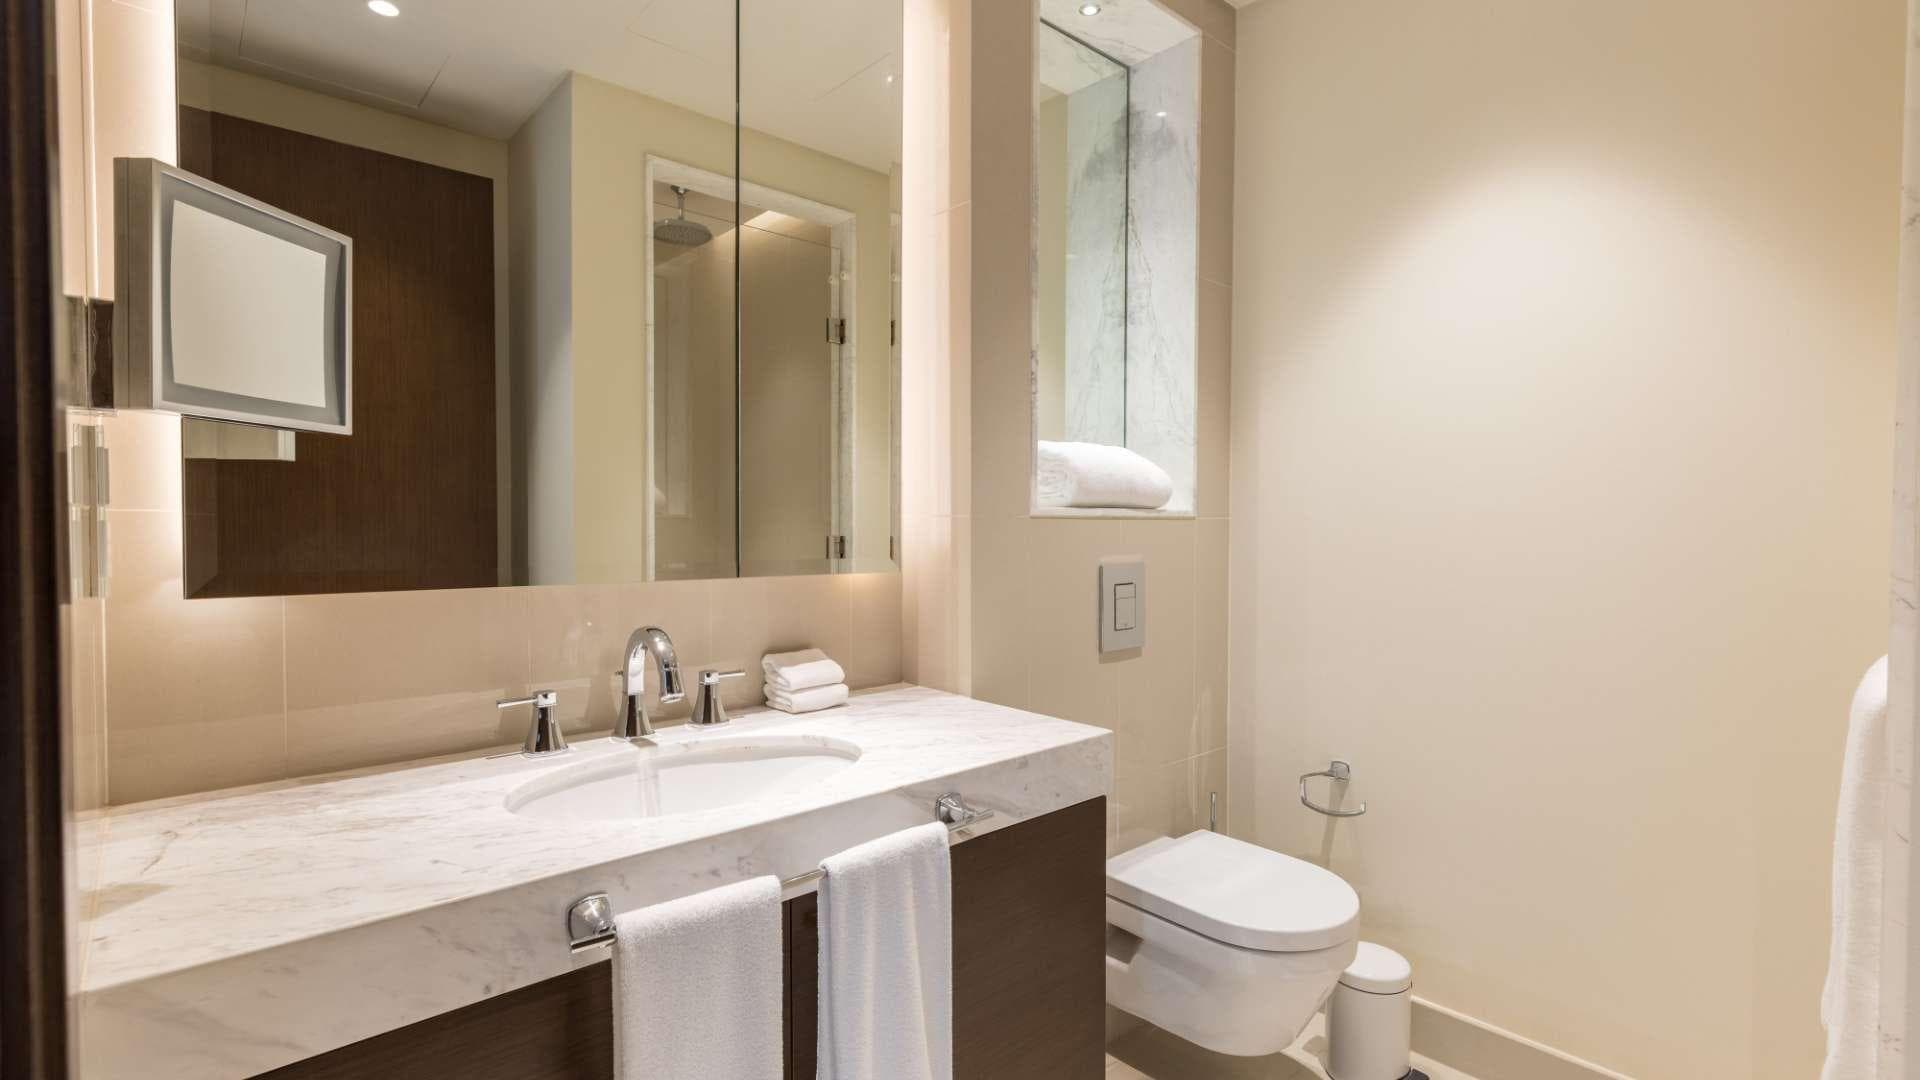 2 Bedroom Apartment For Rent The Address Residence Fountain Views Lp16969 49449fdcf43d880.jpg